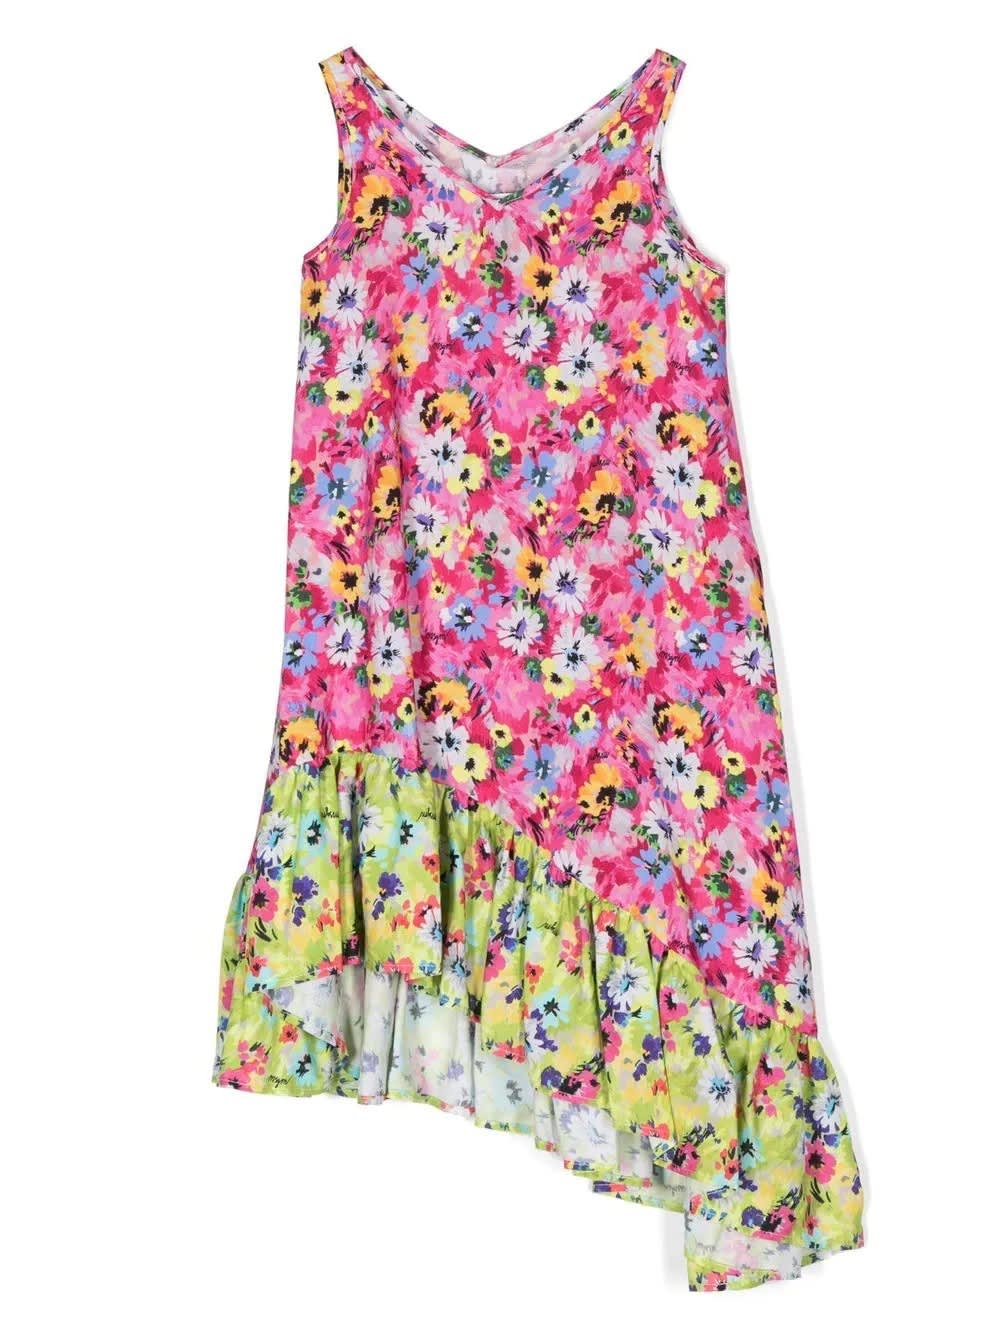 MSGM MULTICOLORED FLORAL DRESS WITH COLOR BLOCK DESIGN